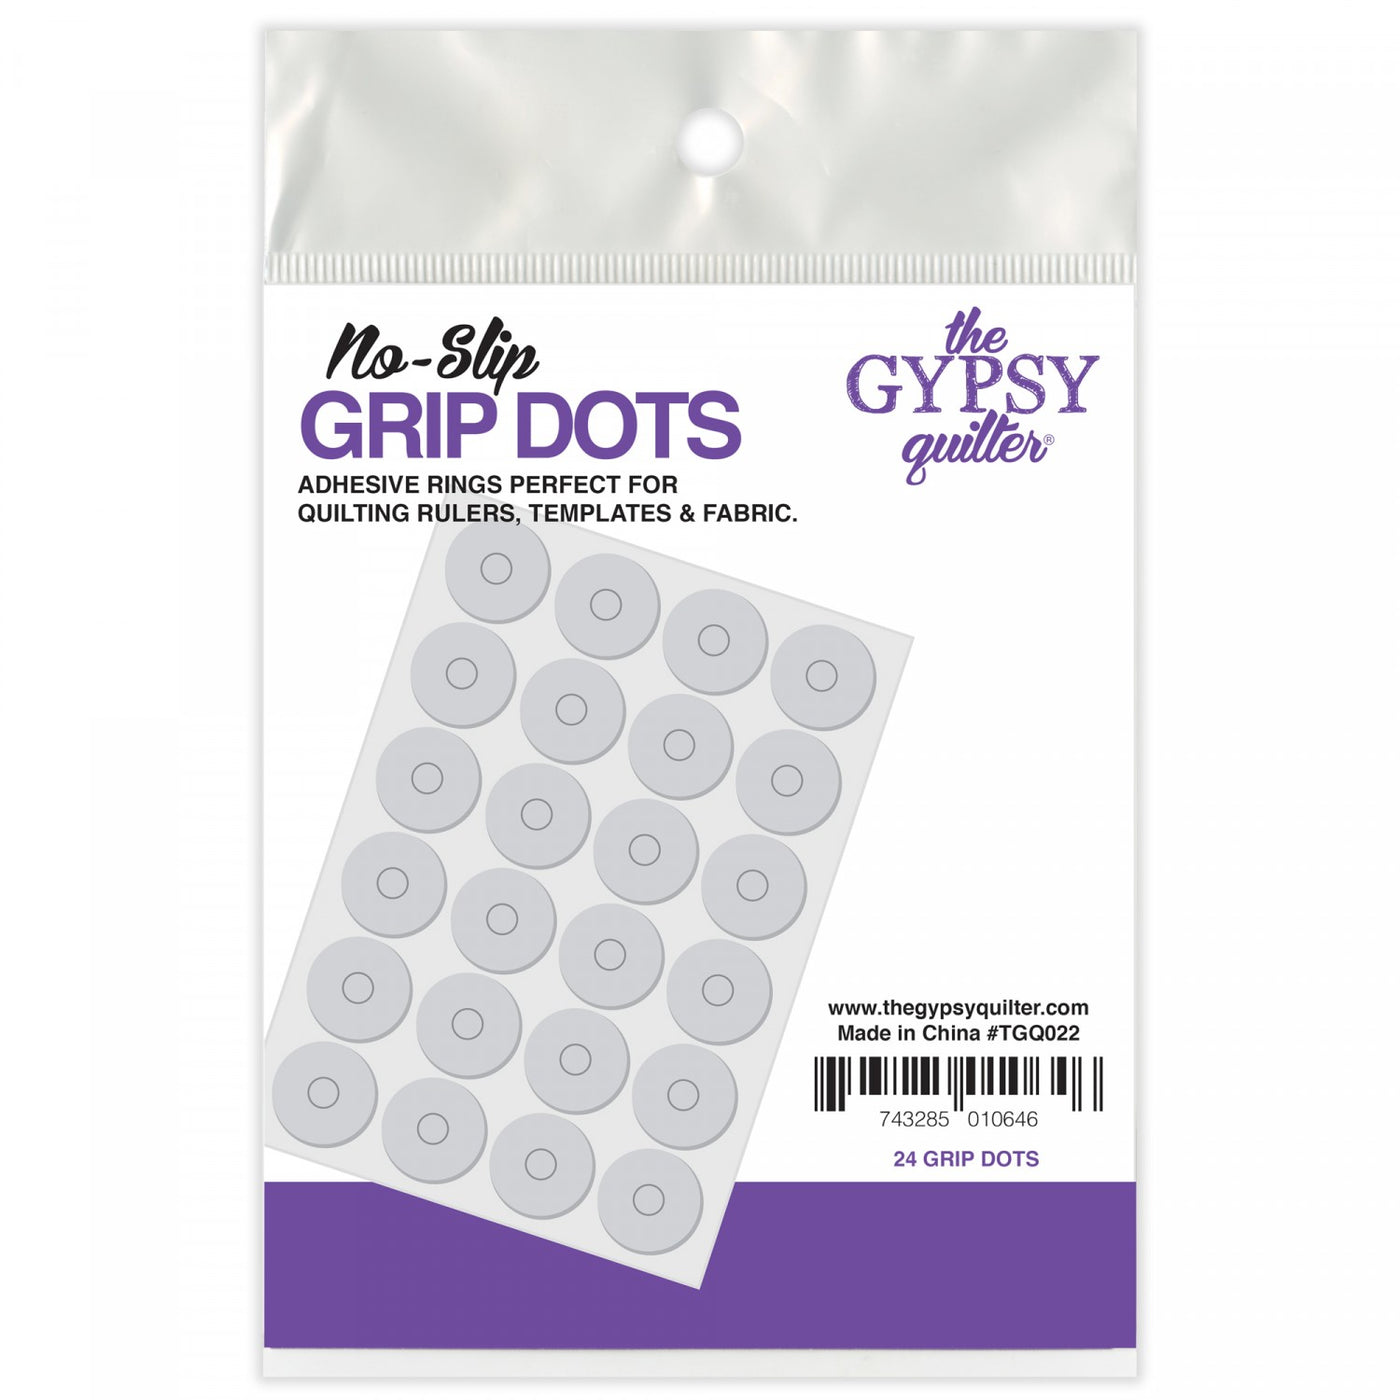 No Slip Grip Dots - The Gypsy Quilter